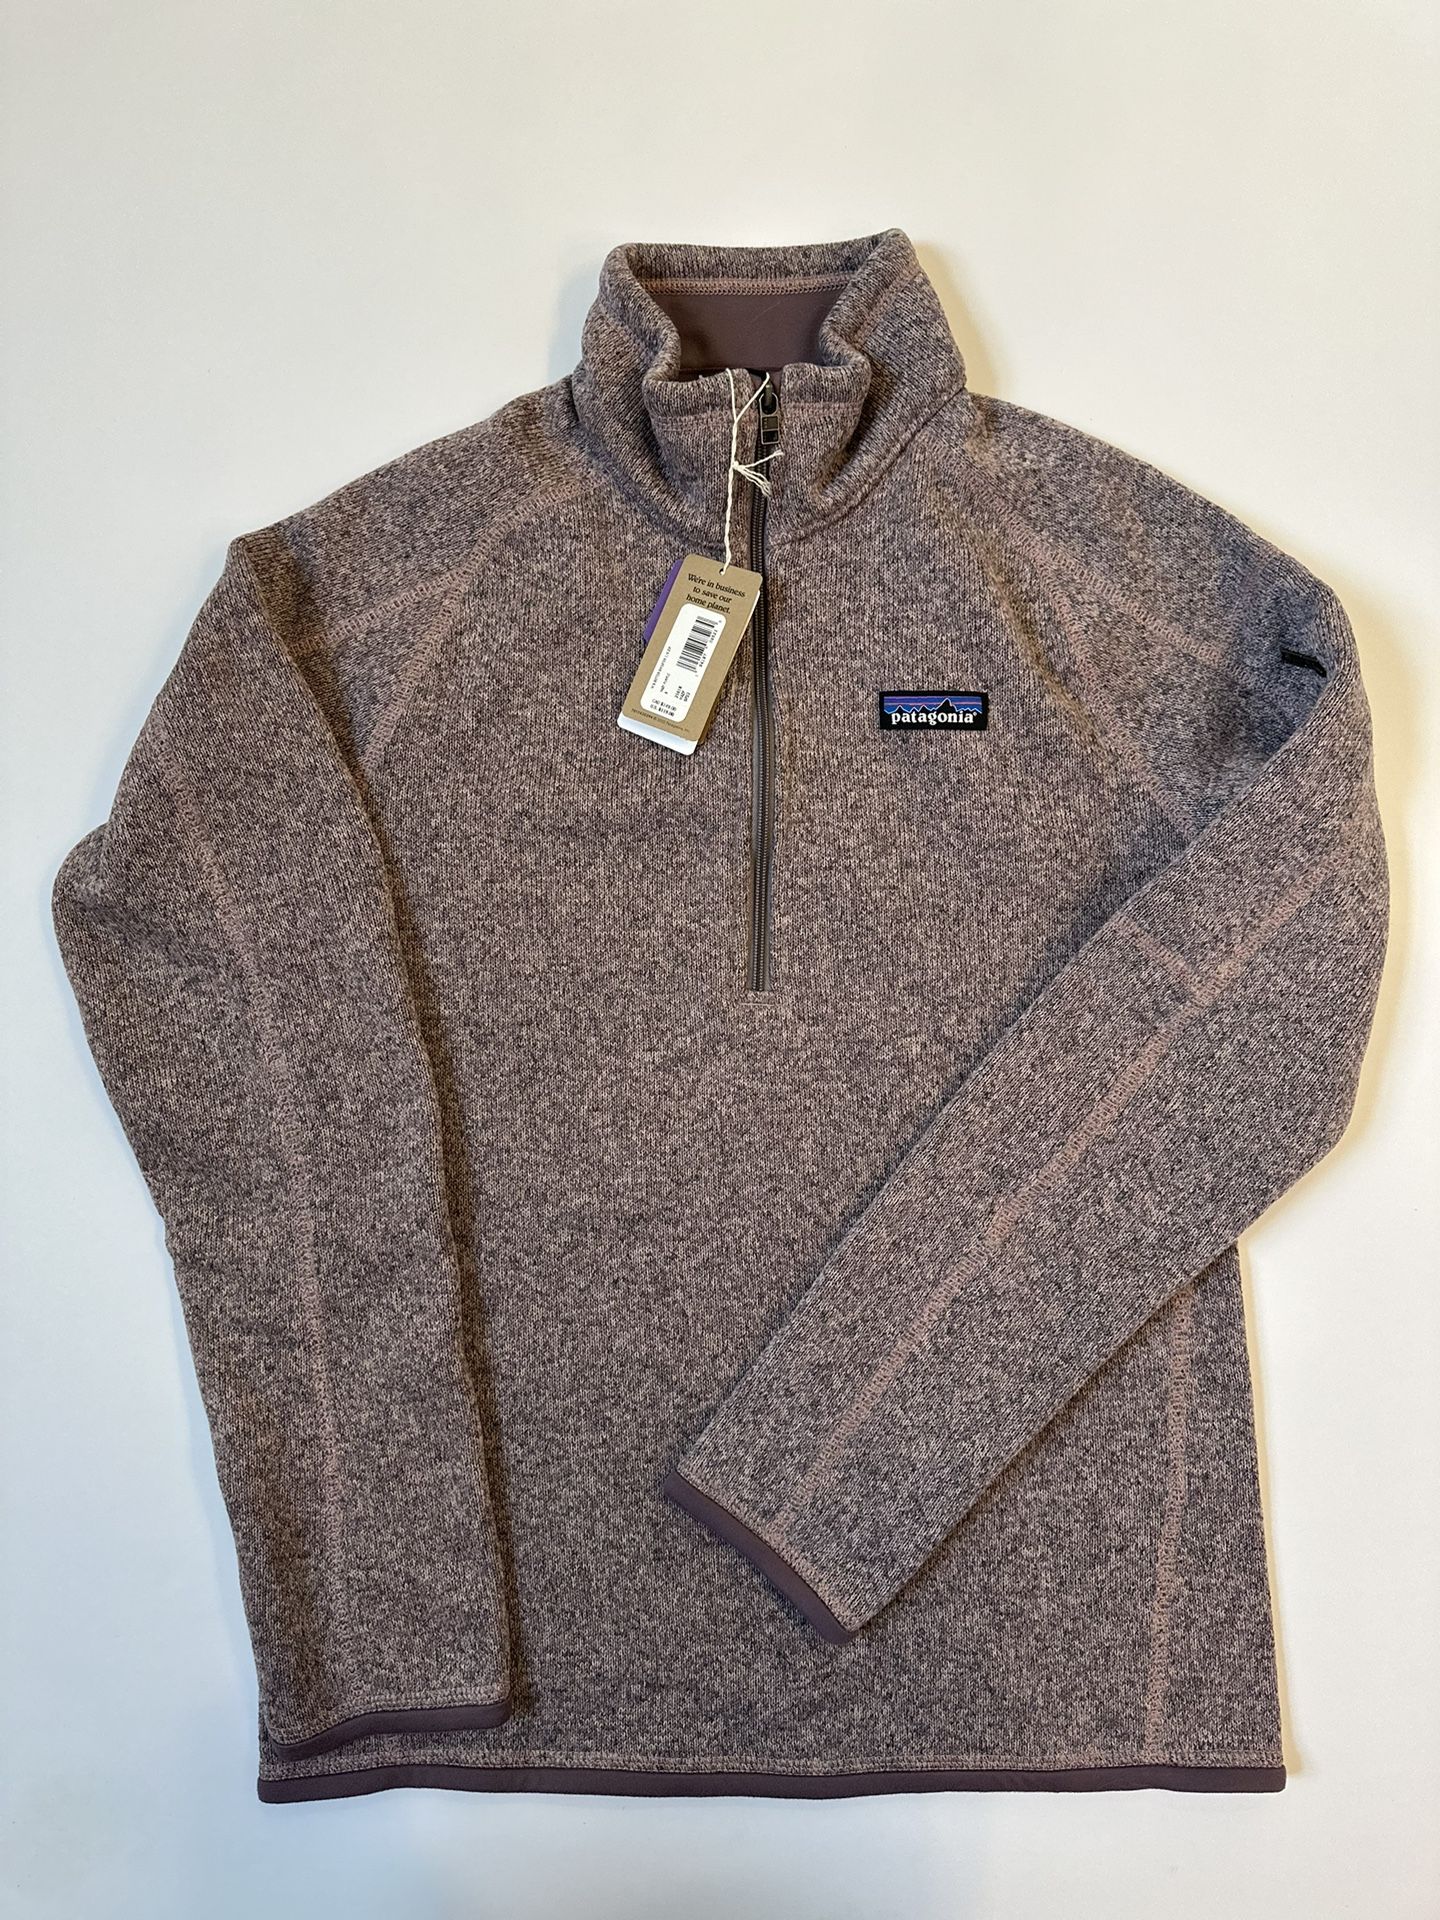 NWT Women’s Patagonia 1/4zip Better Sweater (small)